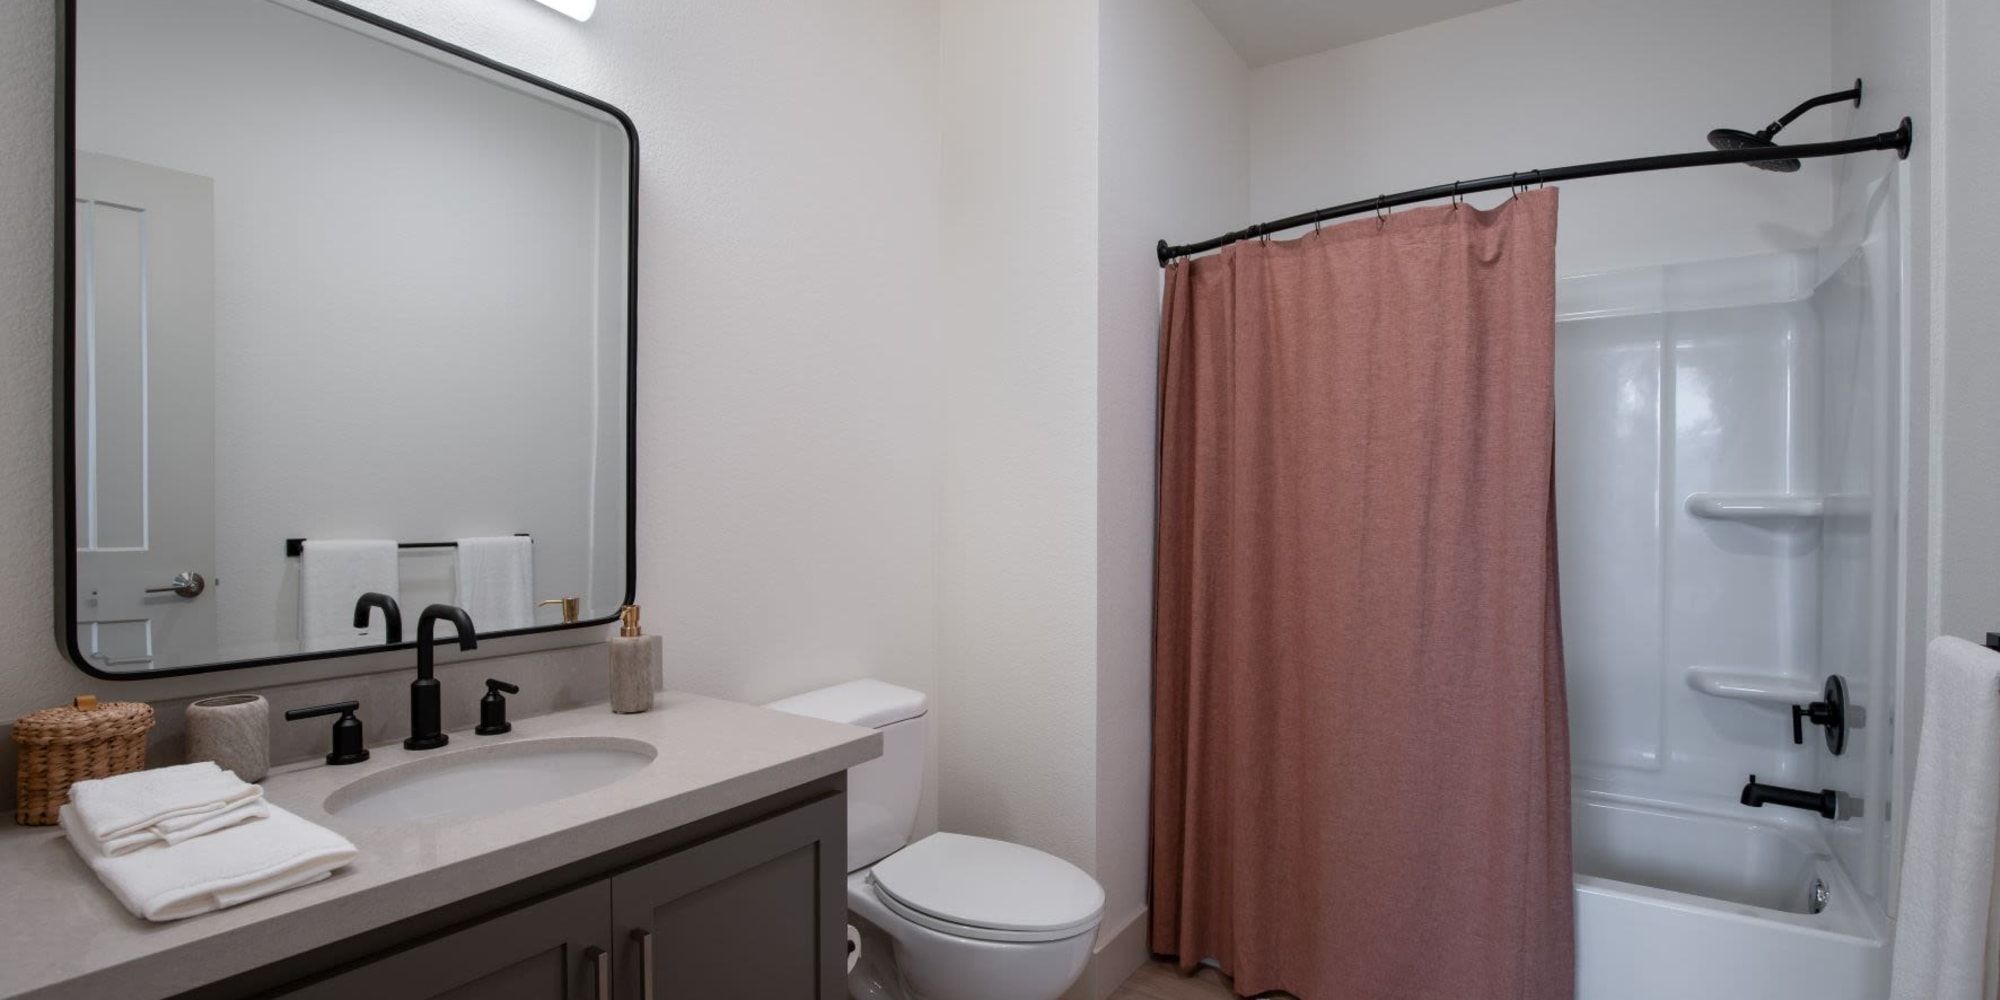 Bathroom with tub at Towne Centre Apartments in Lathrop, California